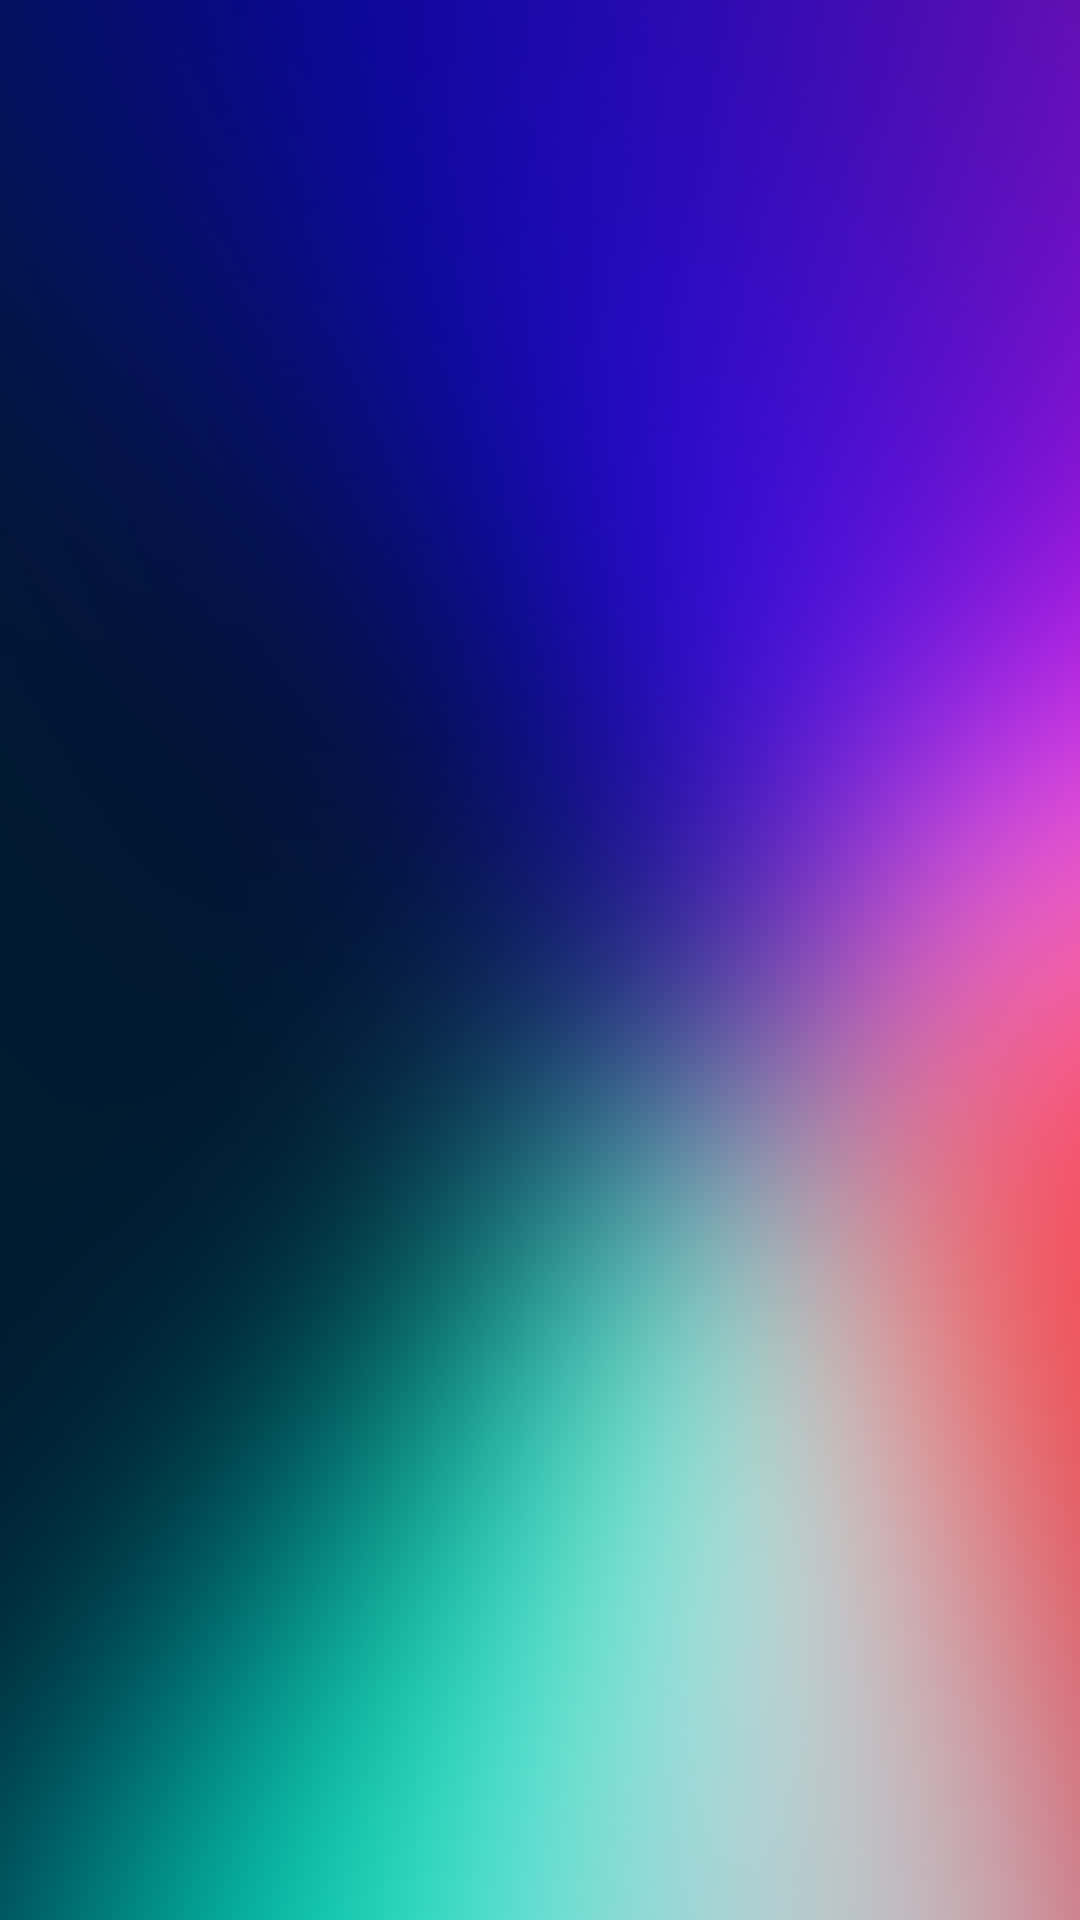 A Blurred Background With A Blue, Red, And Blue Color Wallpaper